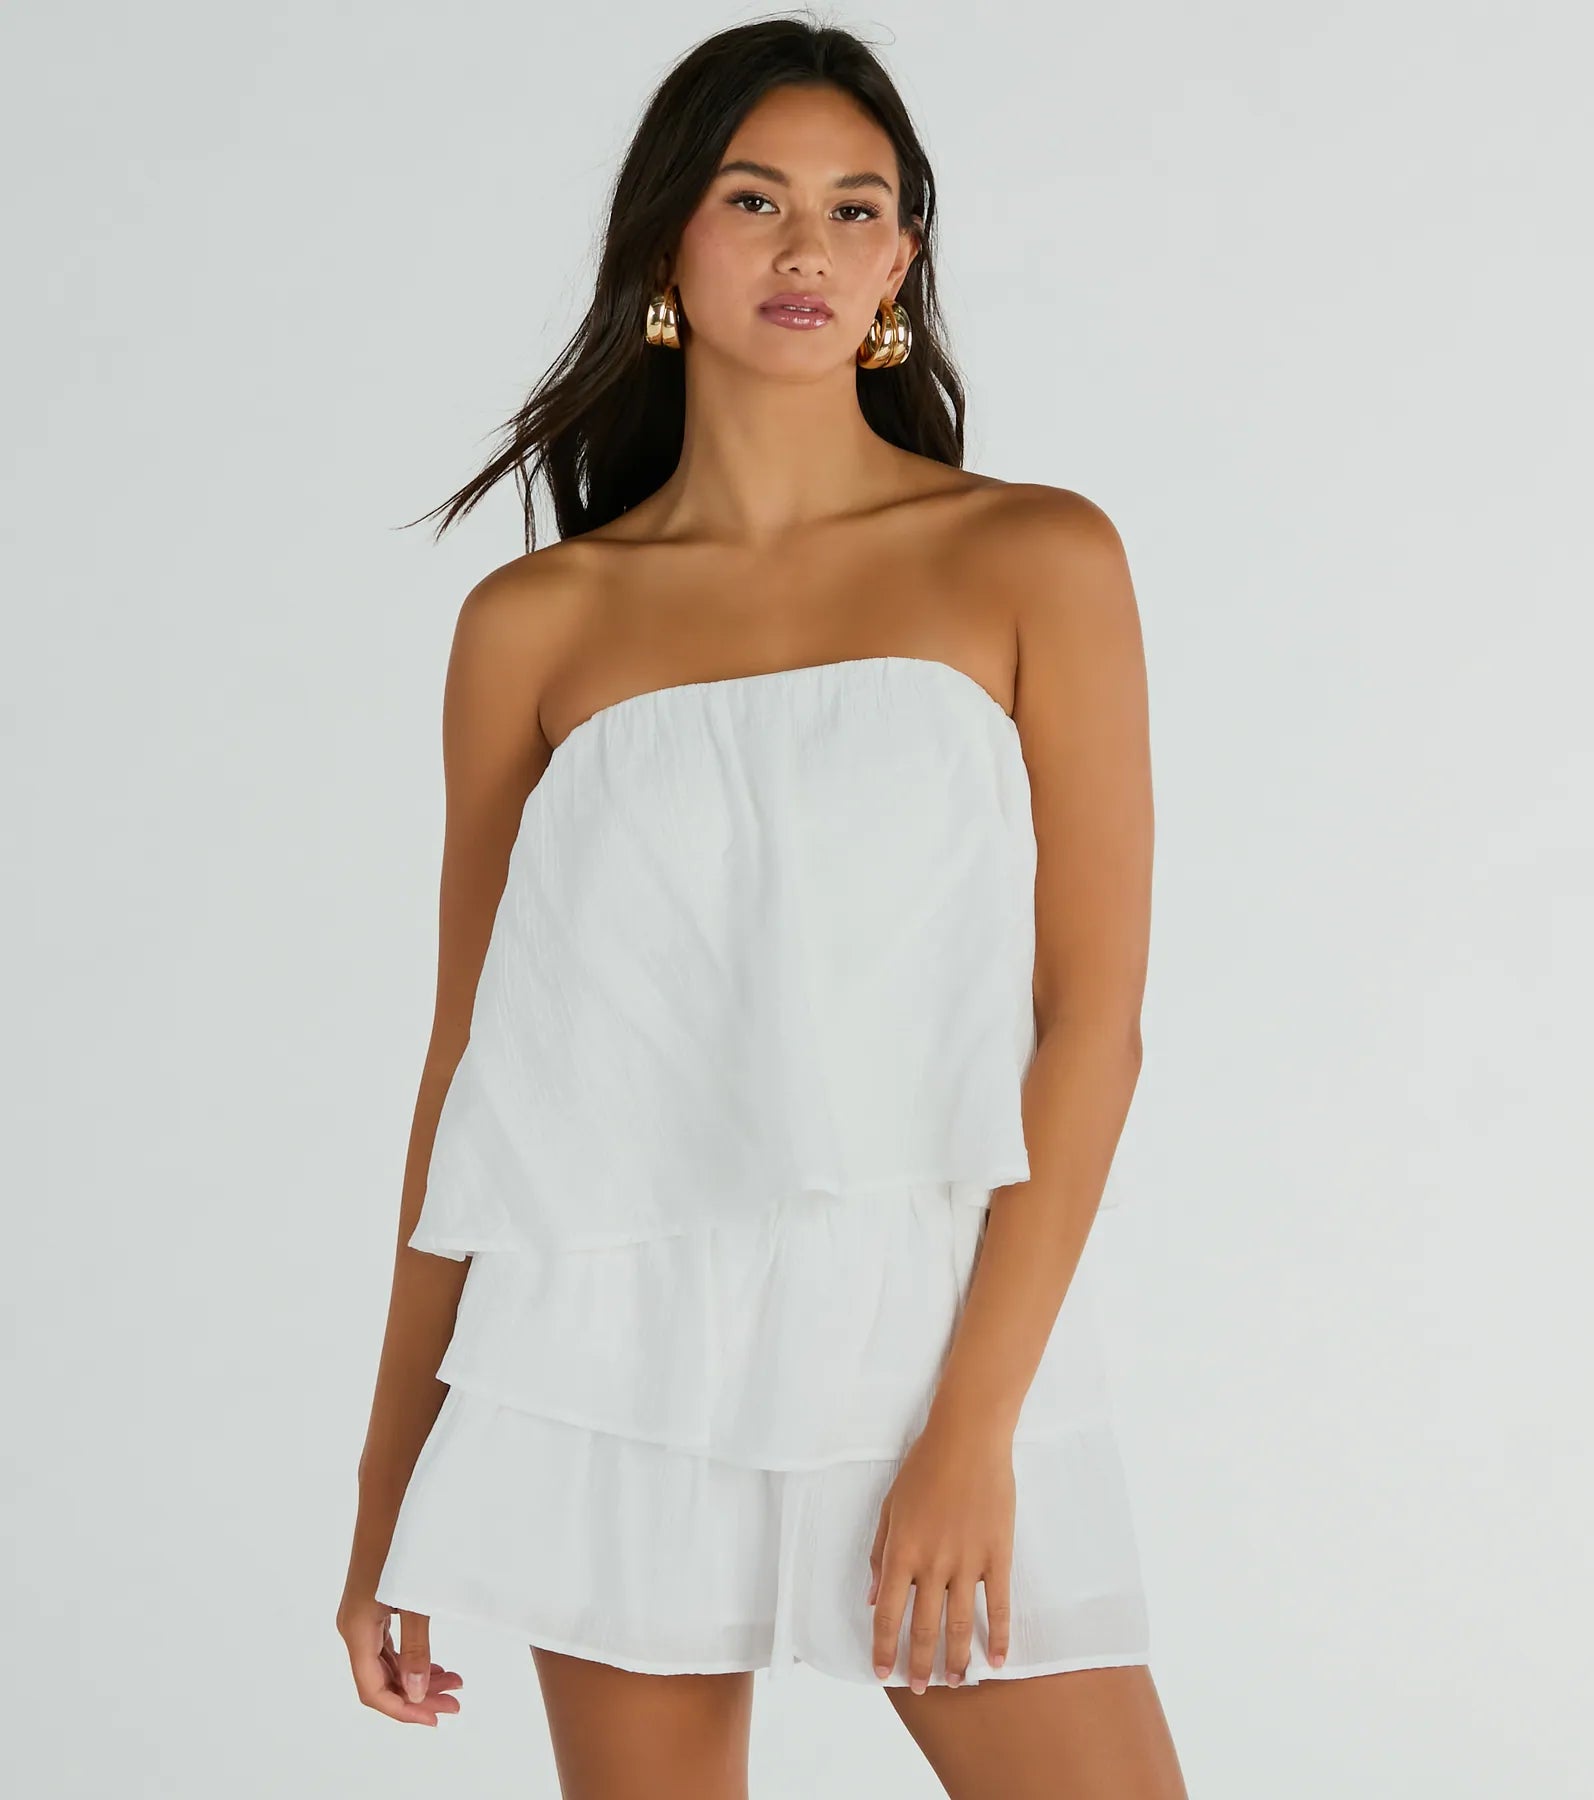 Poolside Vacay Strapless Ruffled Romper